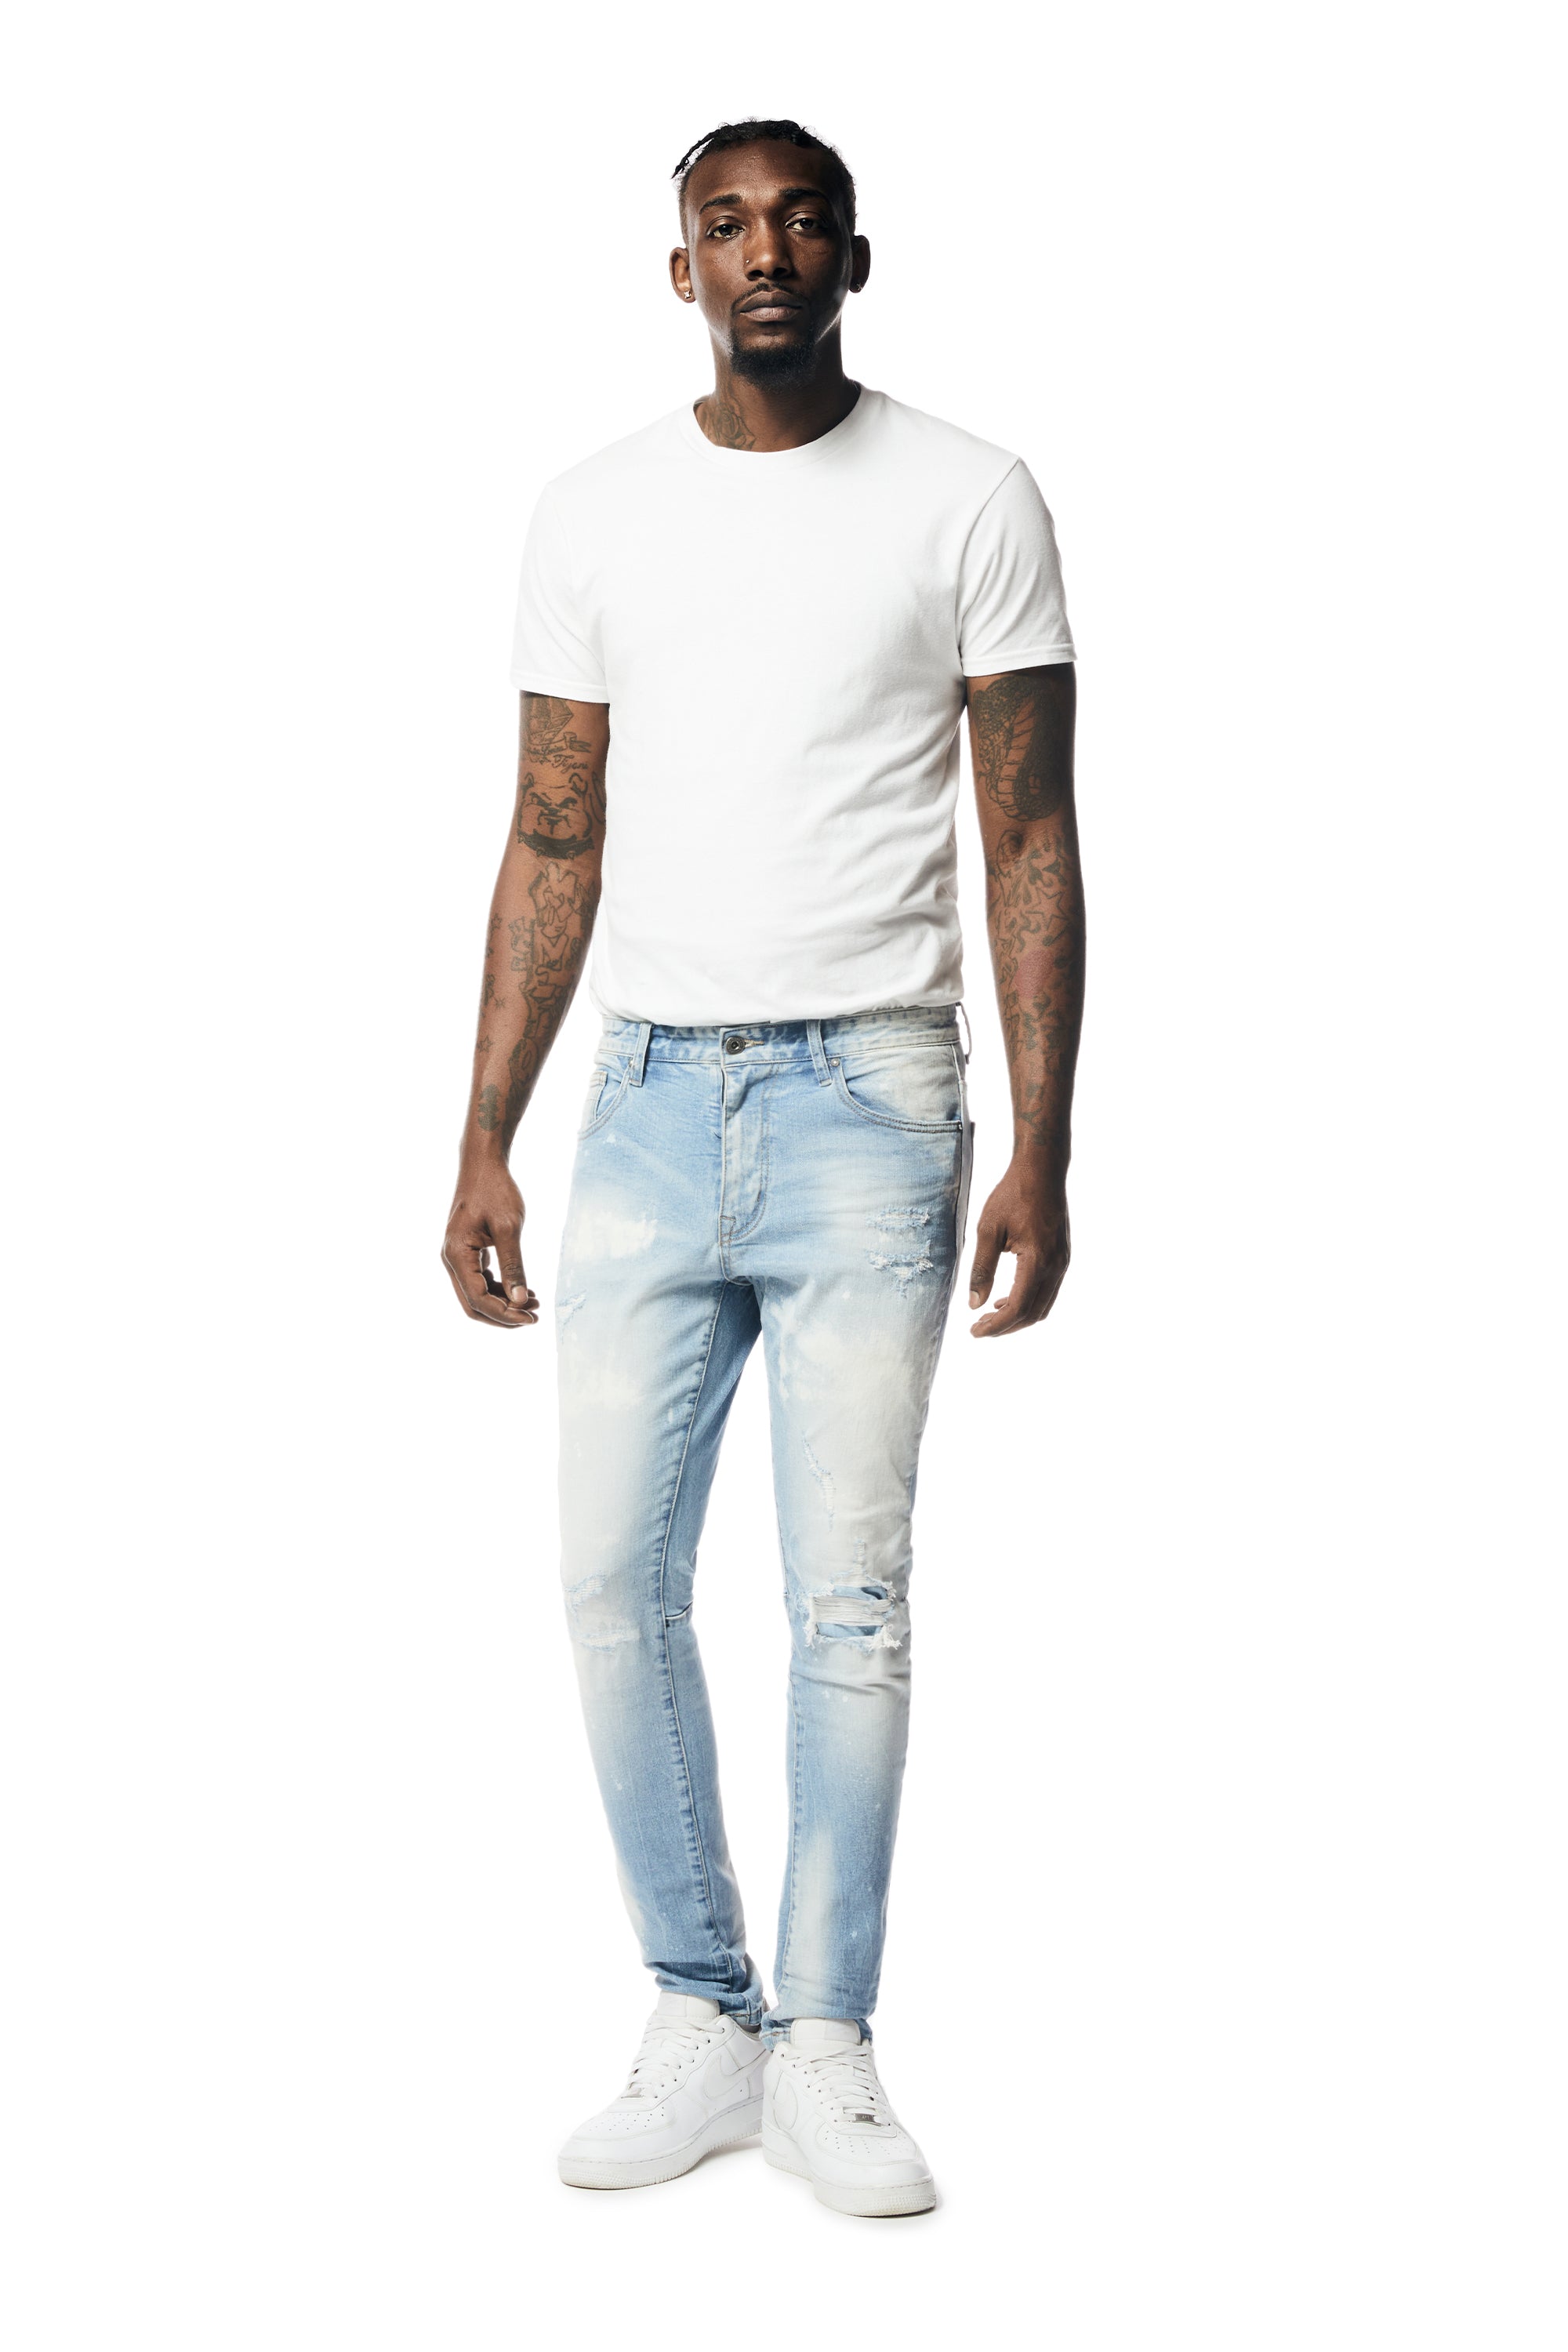 Rip & Repaired Denim Jeans - Lowell Blue